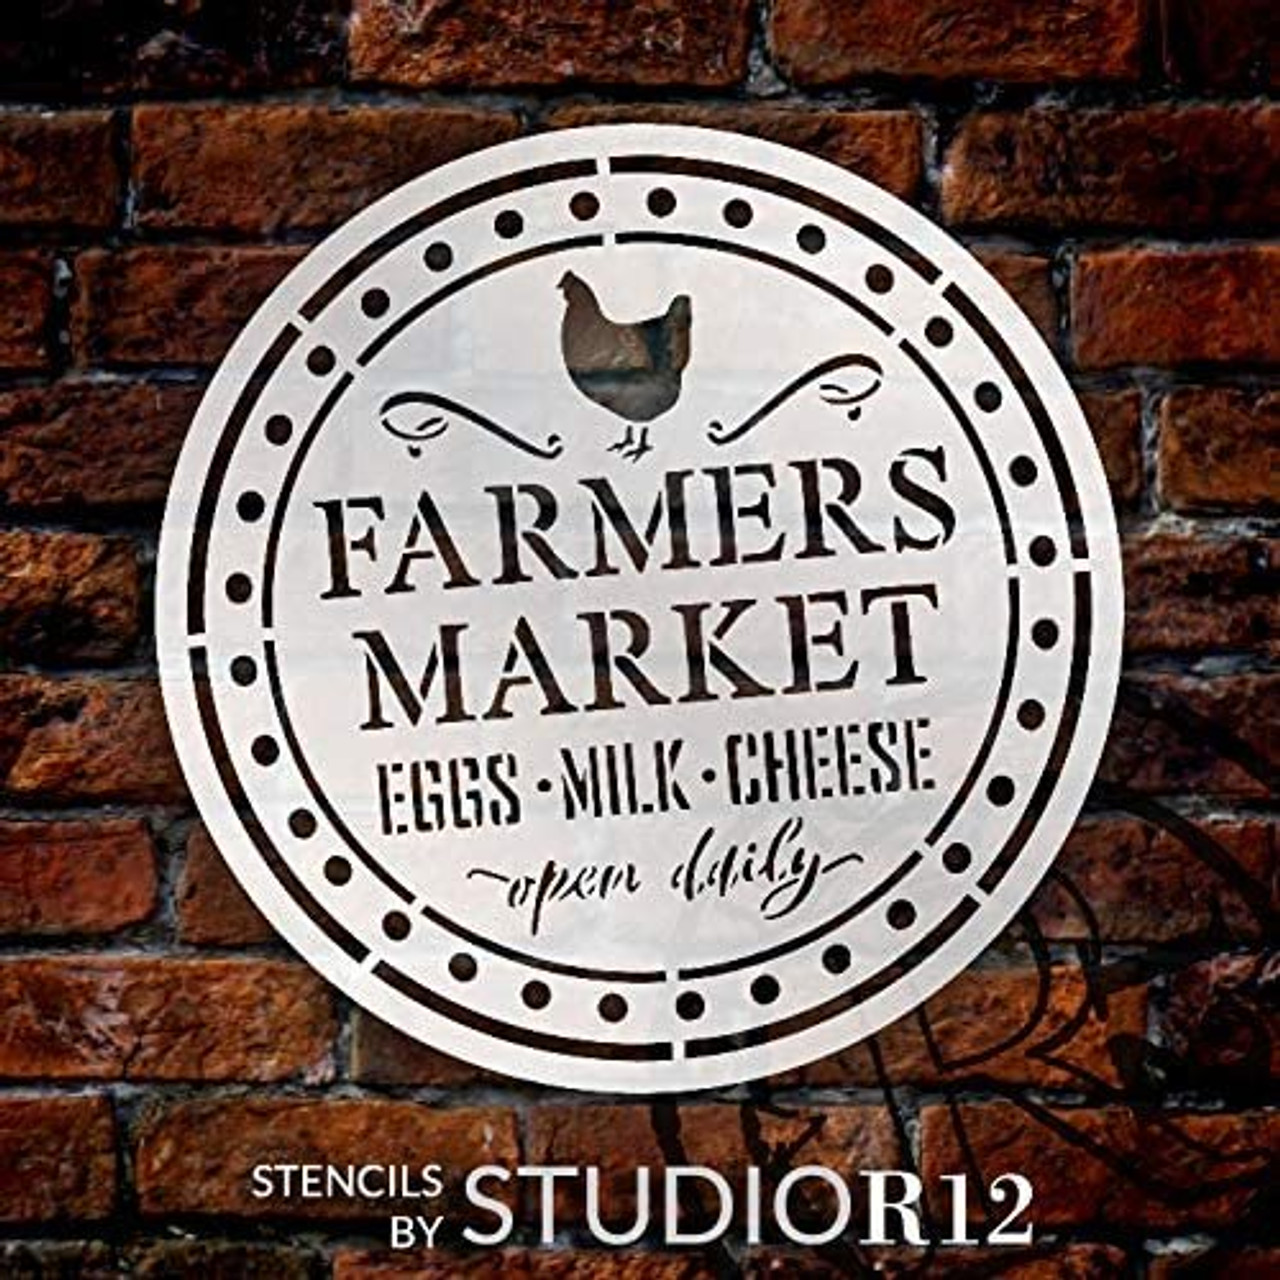 Farmers Market Stencil by StudioR12 | Eggs Milk Cheese Open Daily | DIY Chicken Home Decor | Craft & Paint Wood Sign | Reusable Mylar Template | Rural Country Gift Select Size